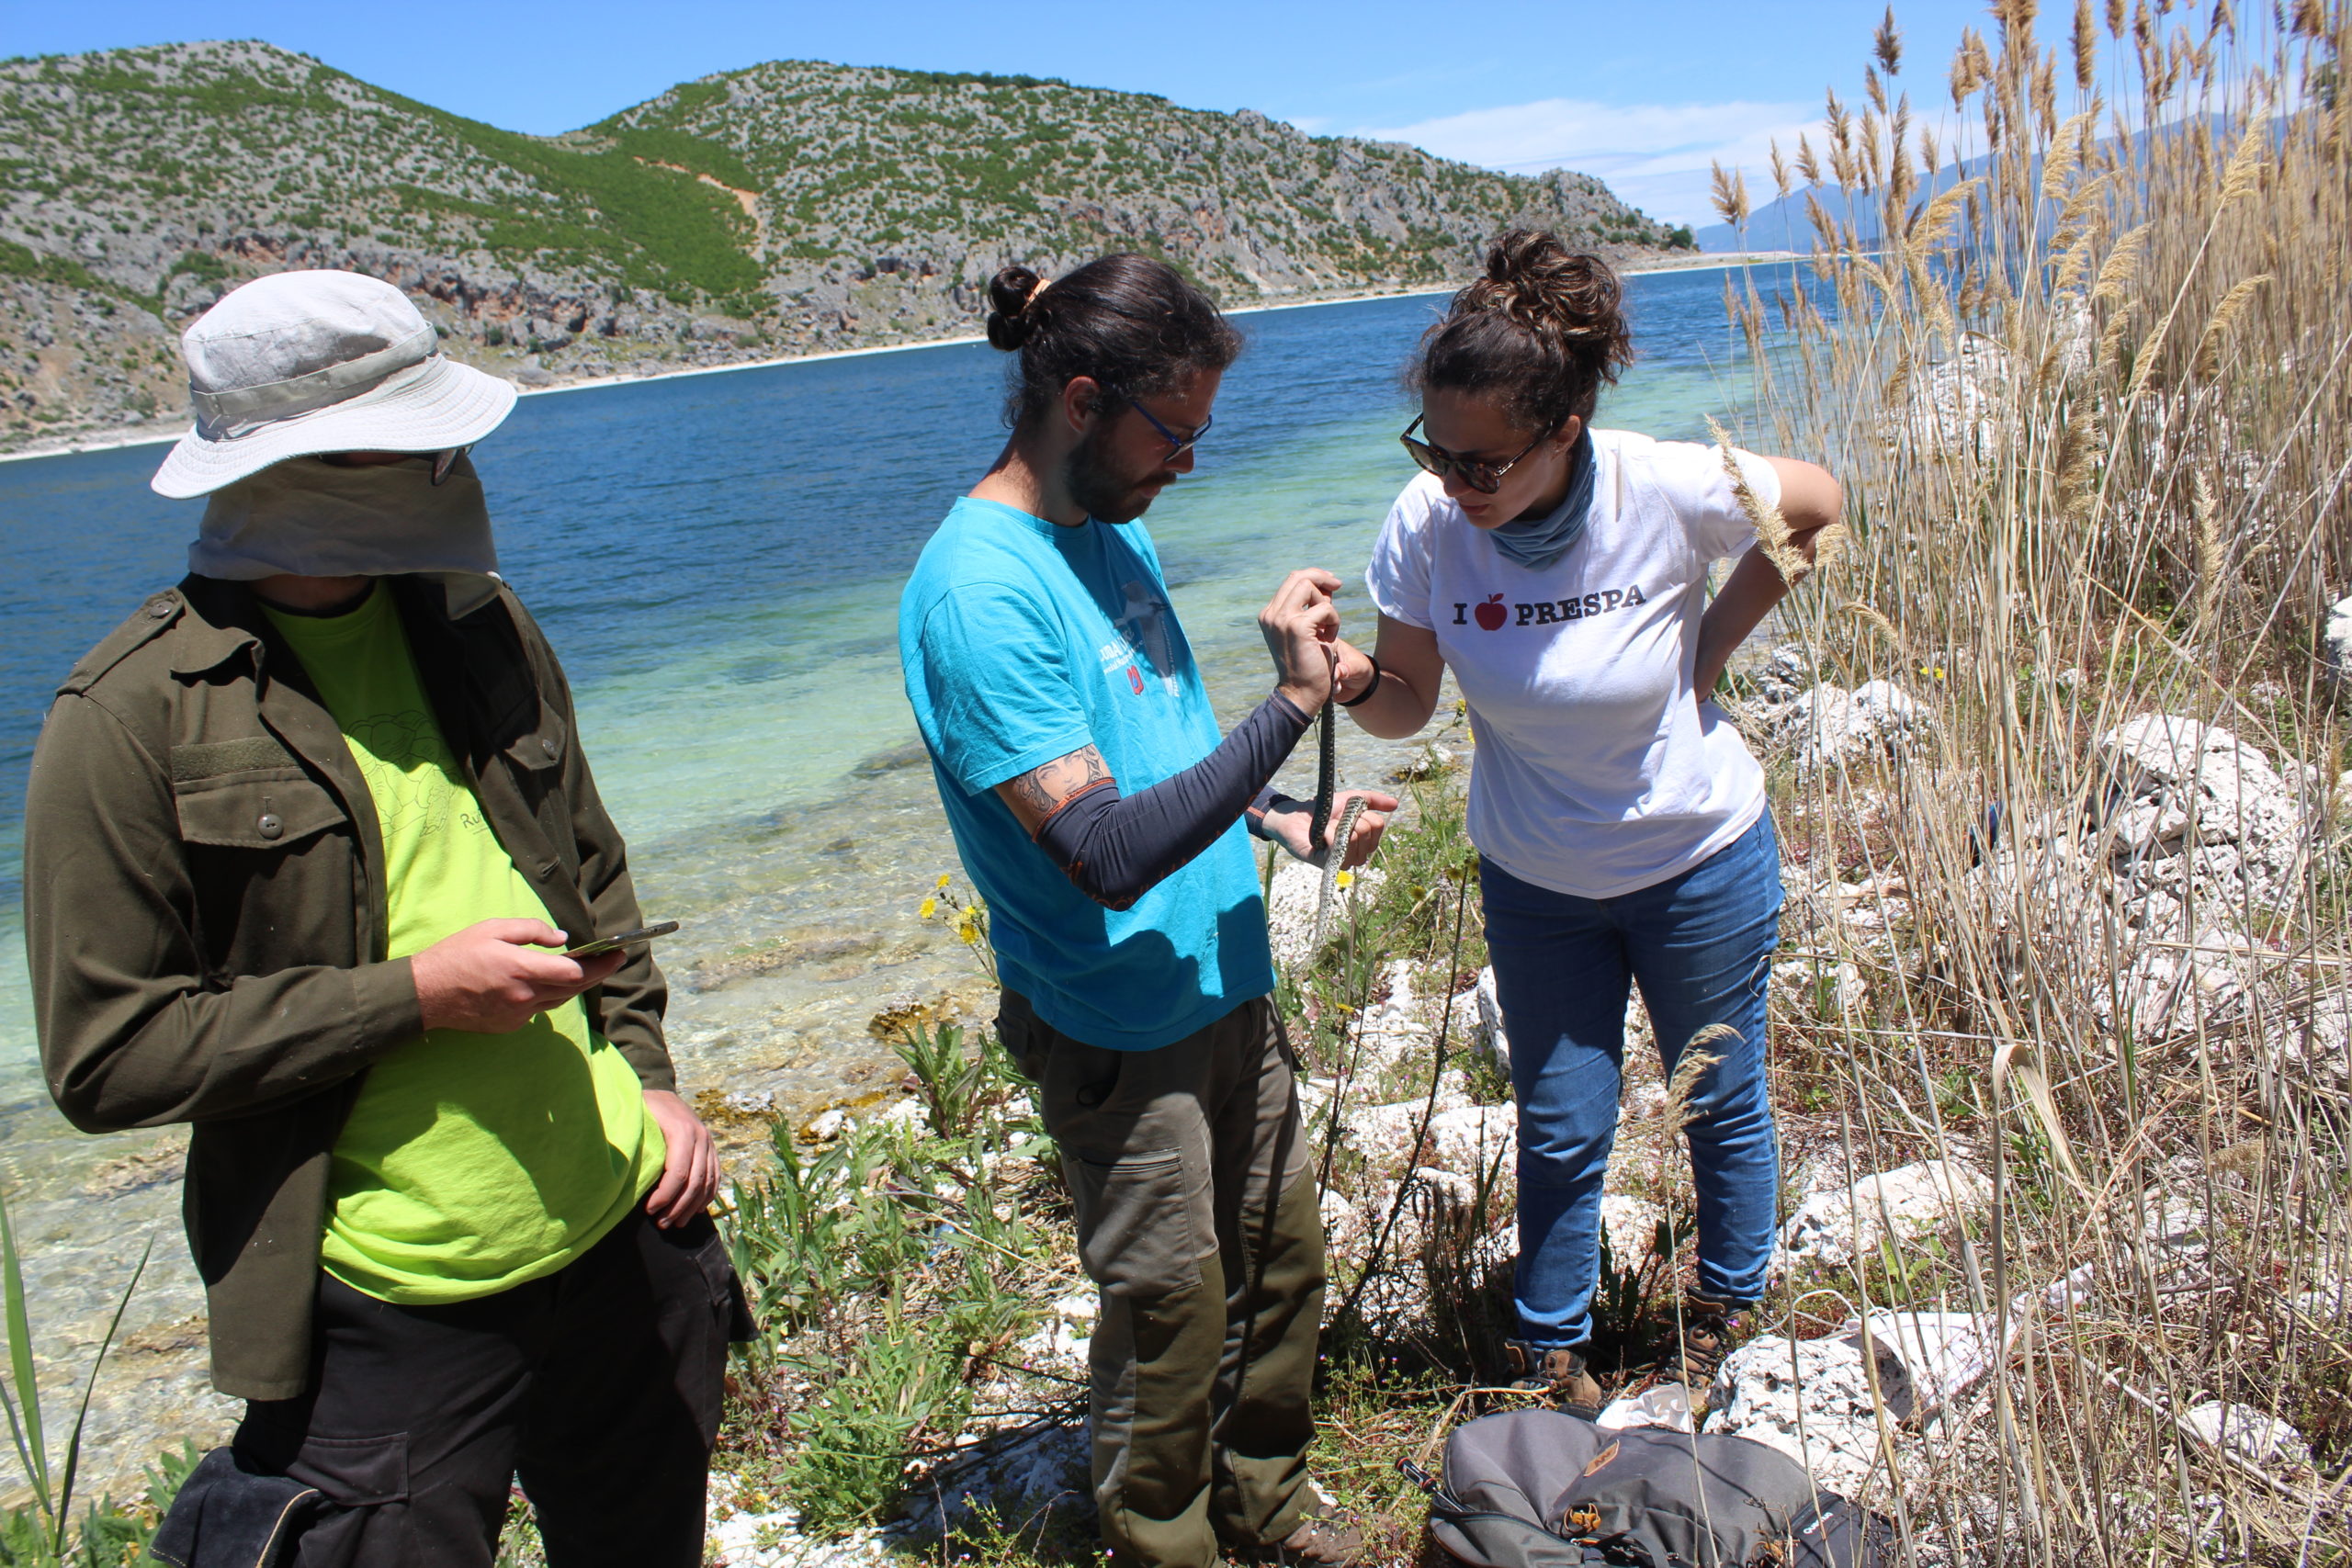 First dice snake monitoring on the Maligrad Island in Prespa